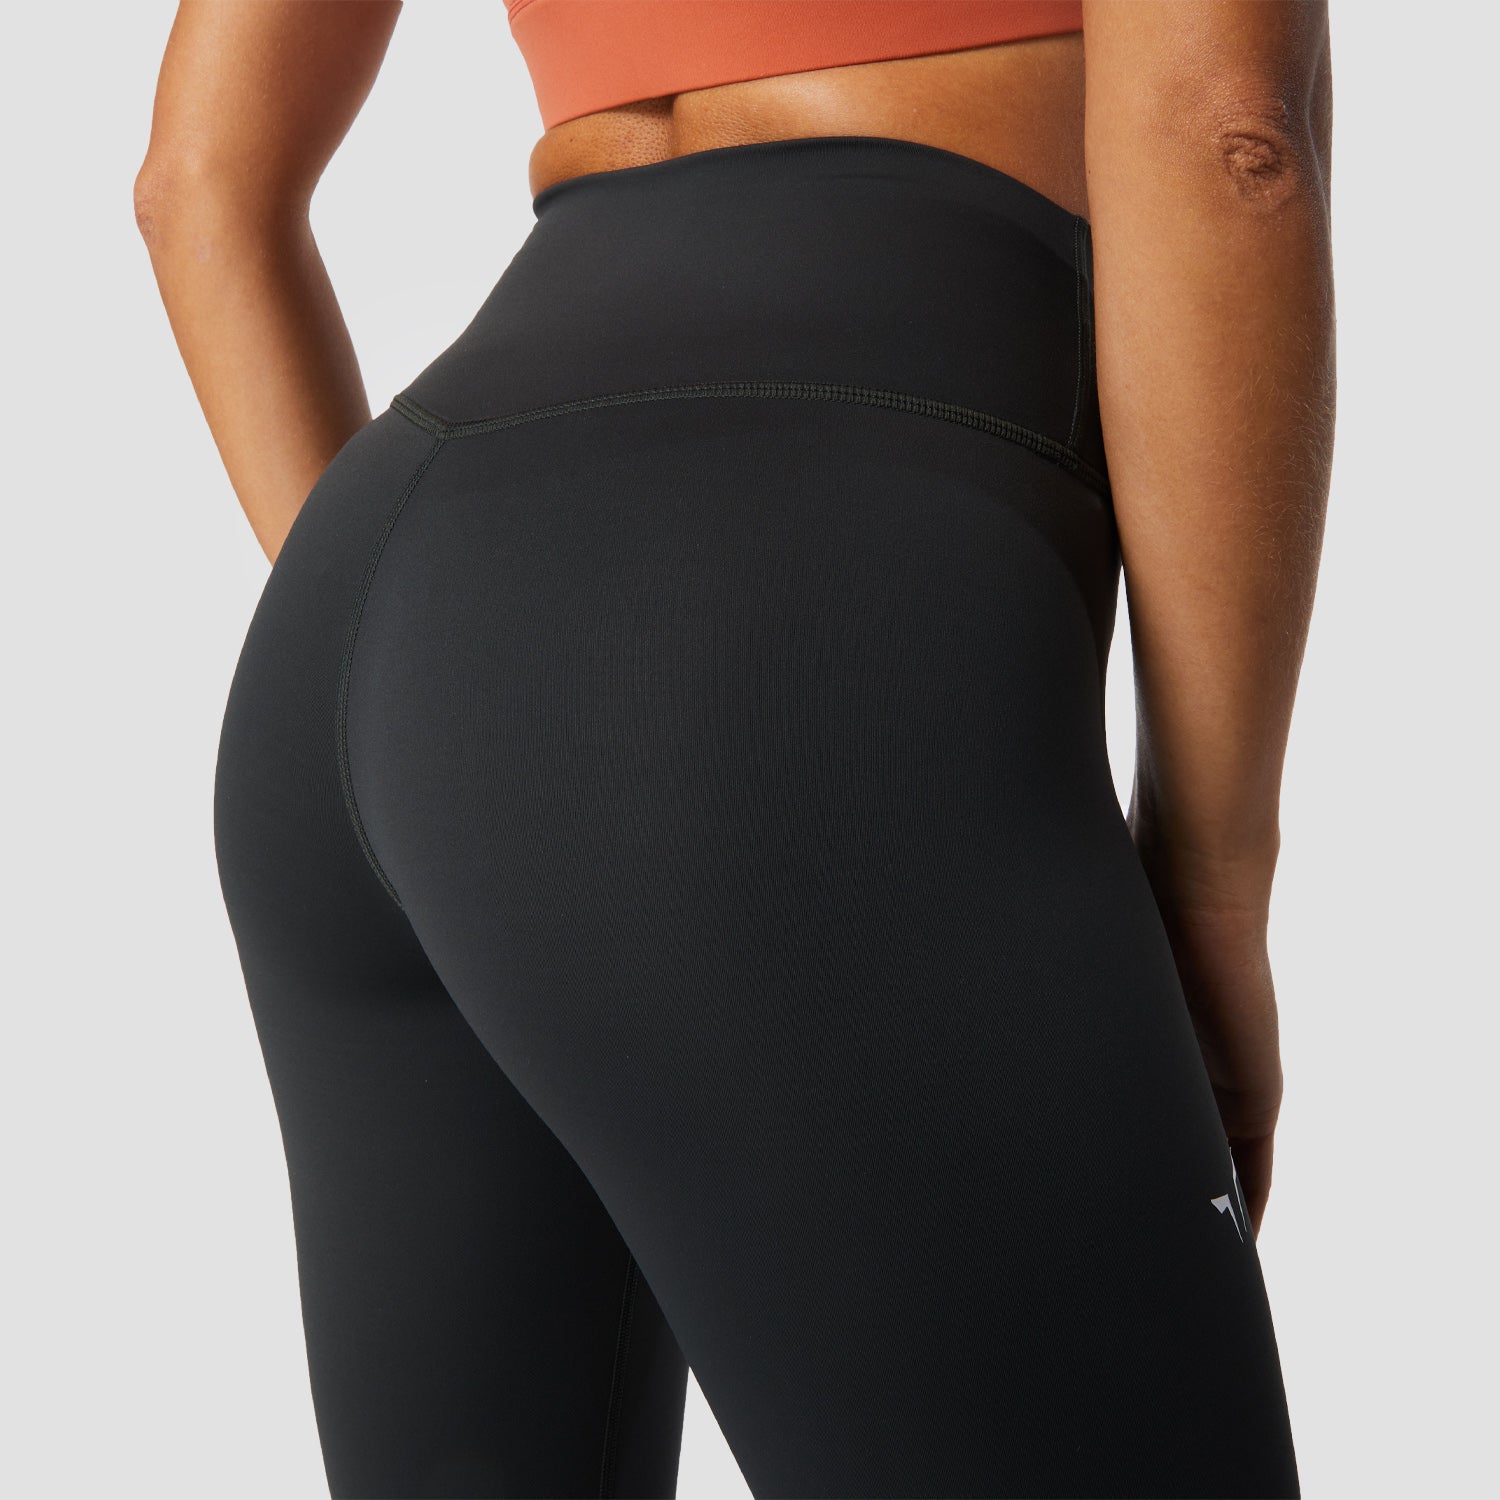 squatwolf-workout-clothes-womens-fitness-7-8-leggings-charcoal-gym-leggings-for-women